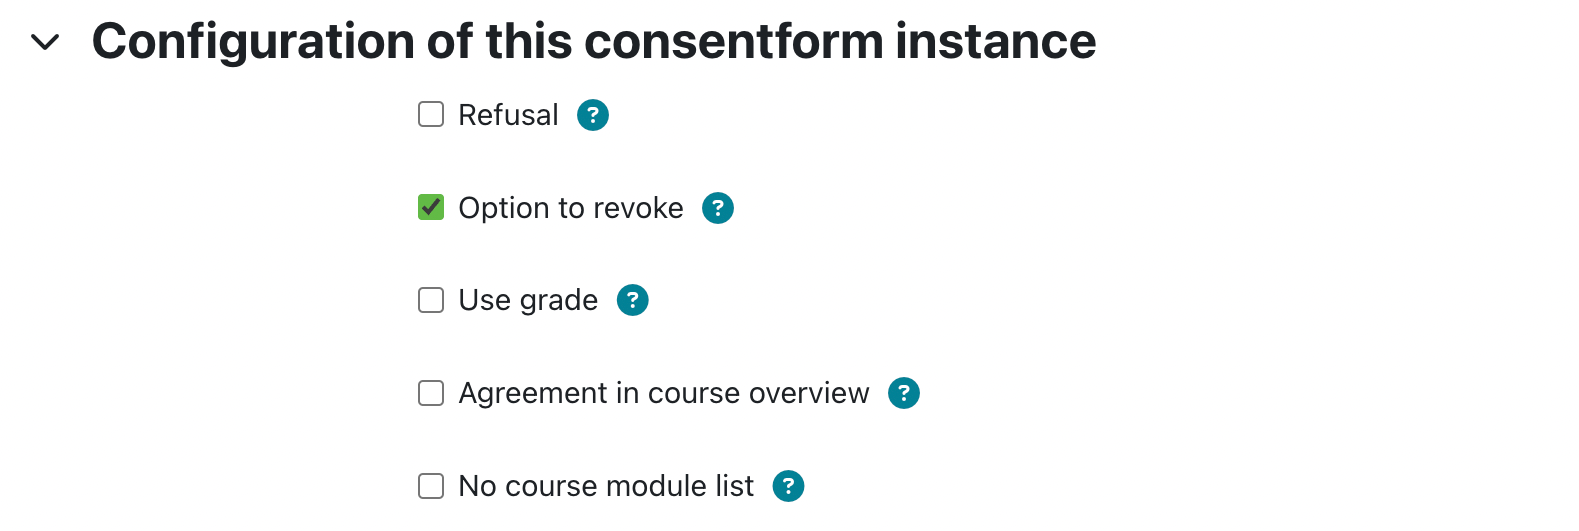 Screenshot of the configuration options of the consentform